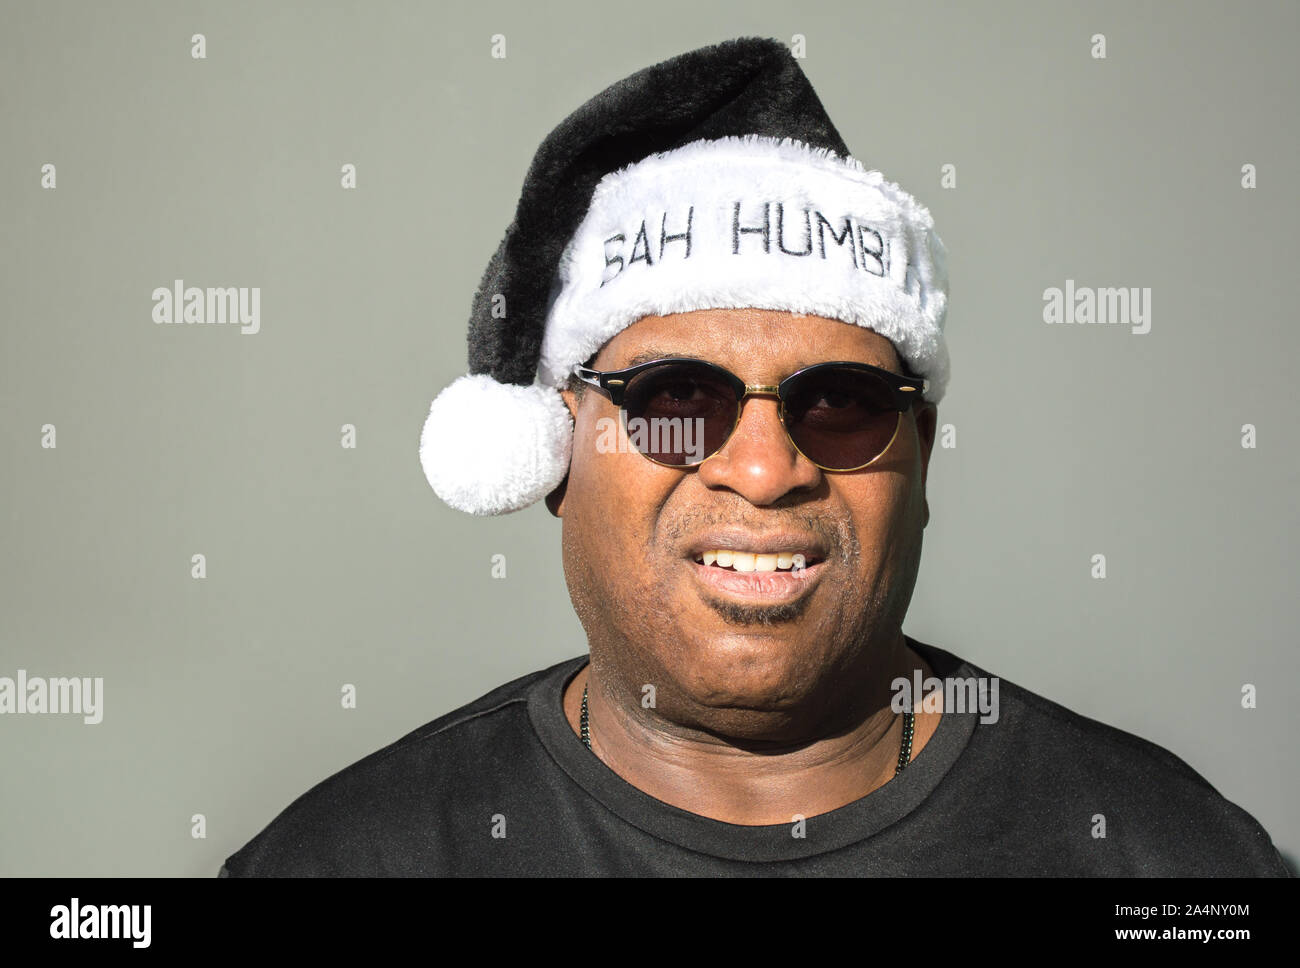 a frowning middle aged African American man wearing a black and white Santa Claus hat saying Bah Humbug on it against a solid background Stock Photo